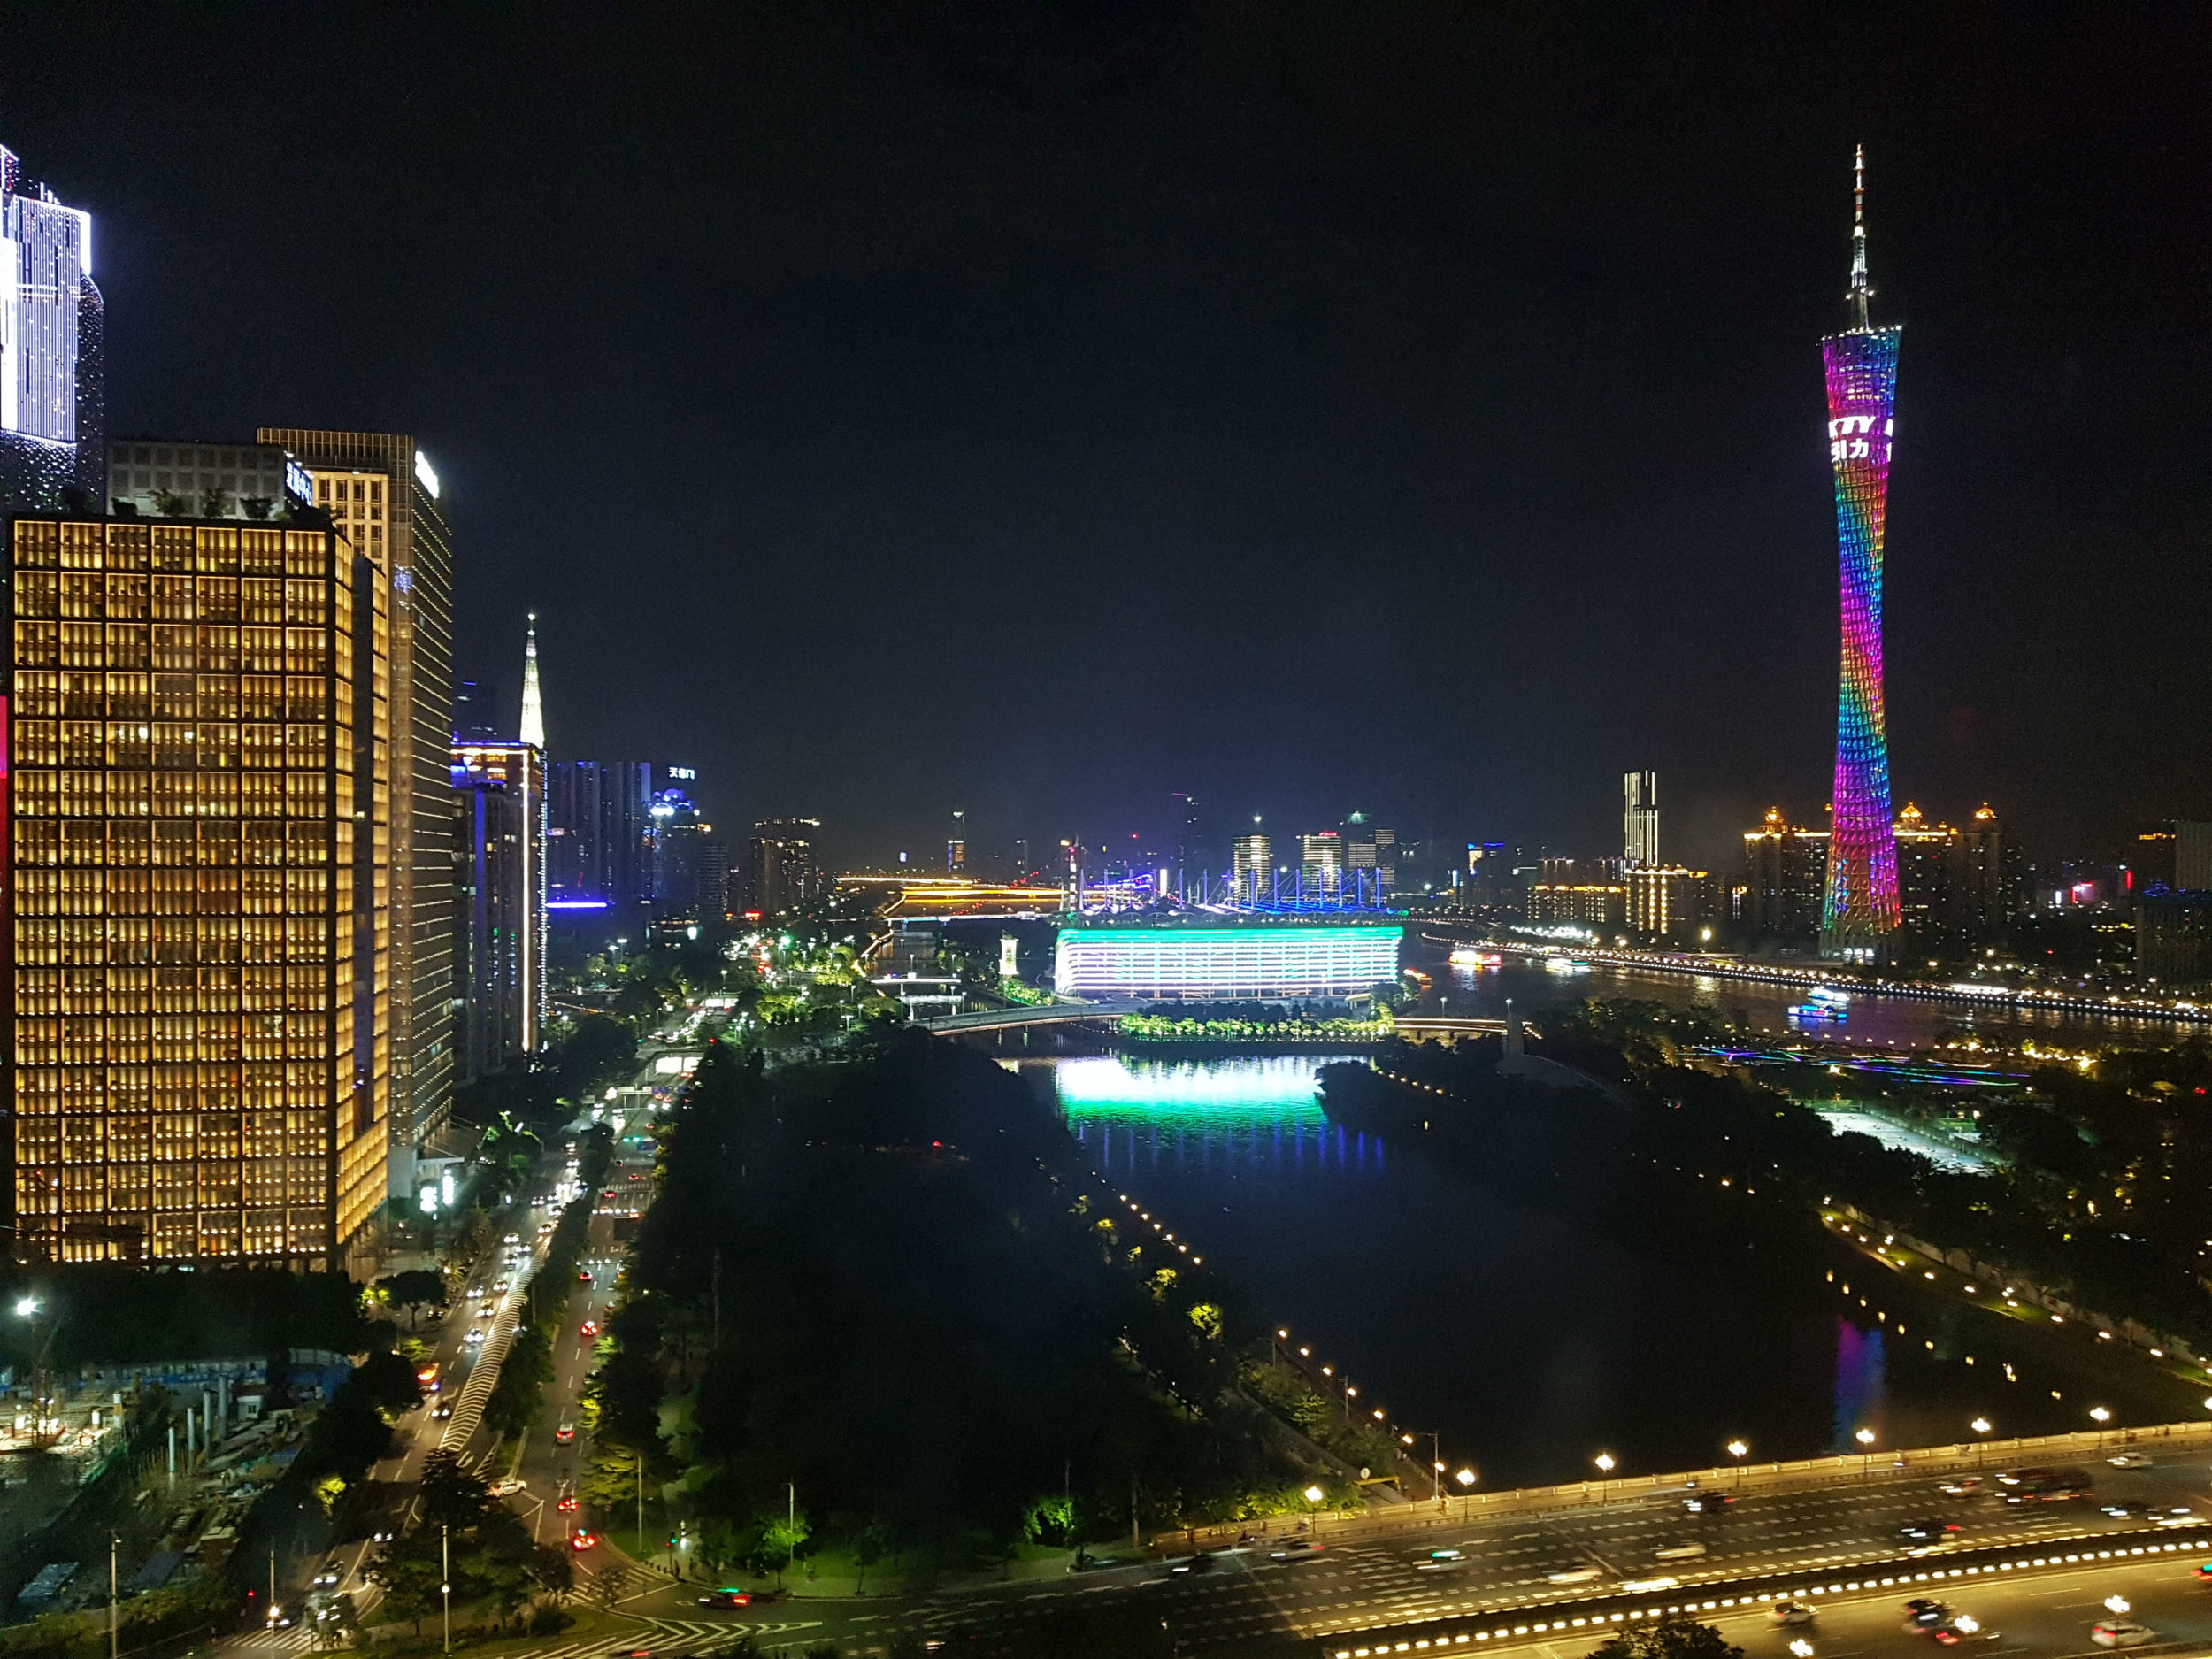 An eye-opening experience, the Skyline Guangzhou - note 650-meter high Cantor Tower